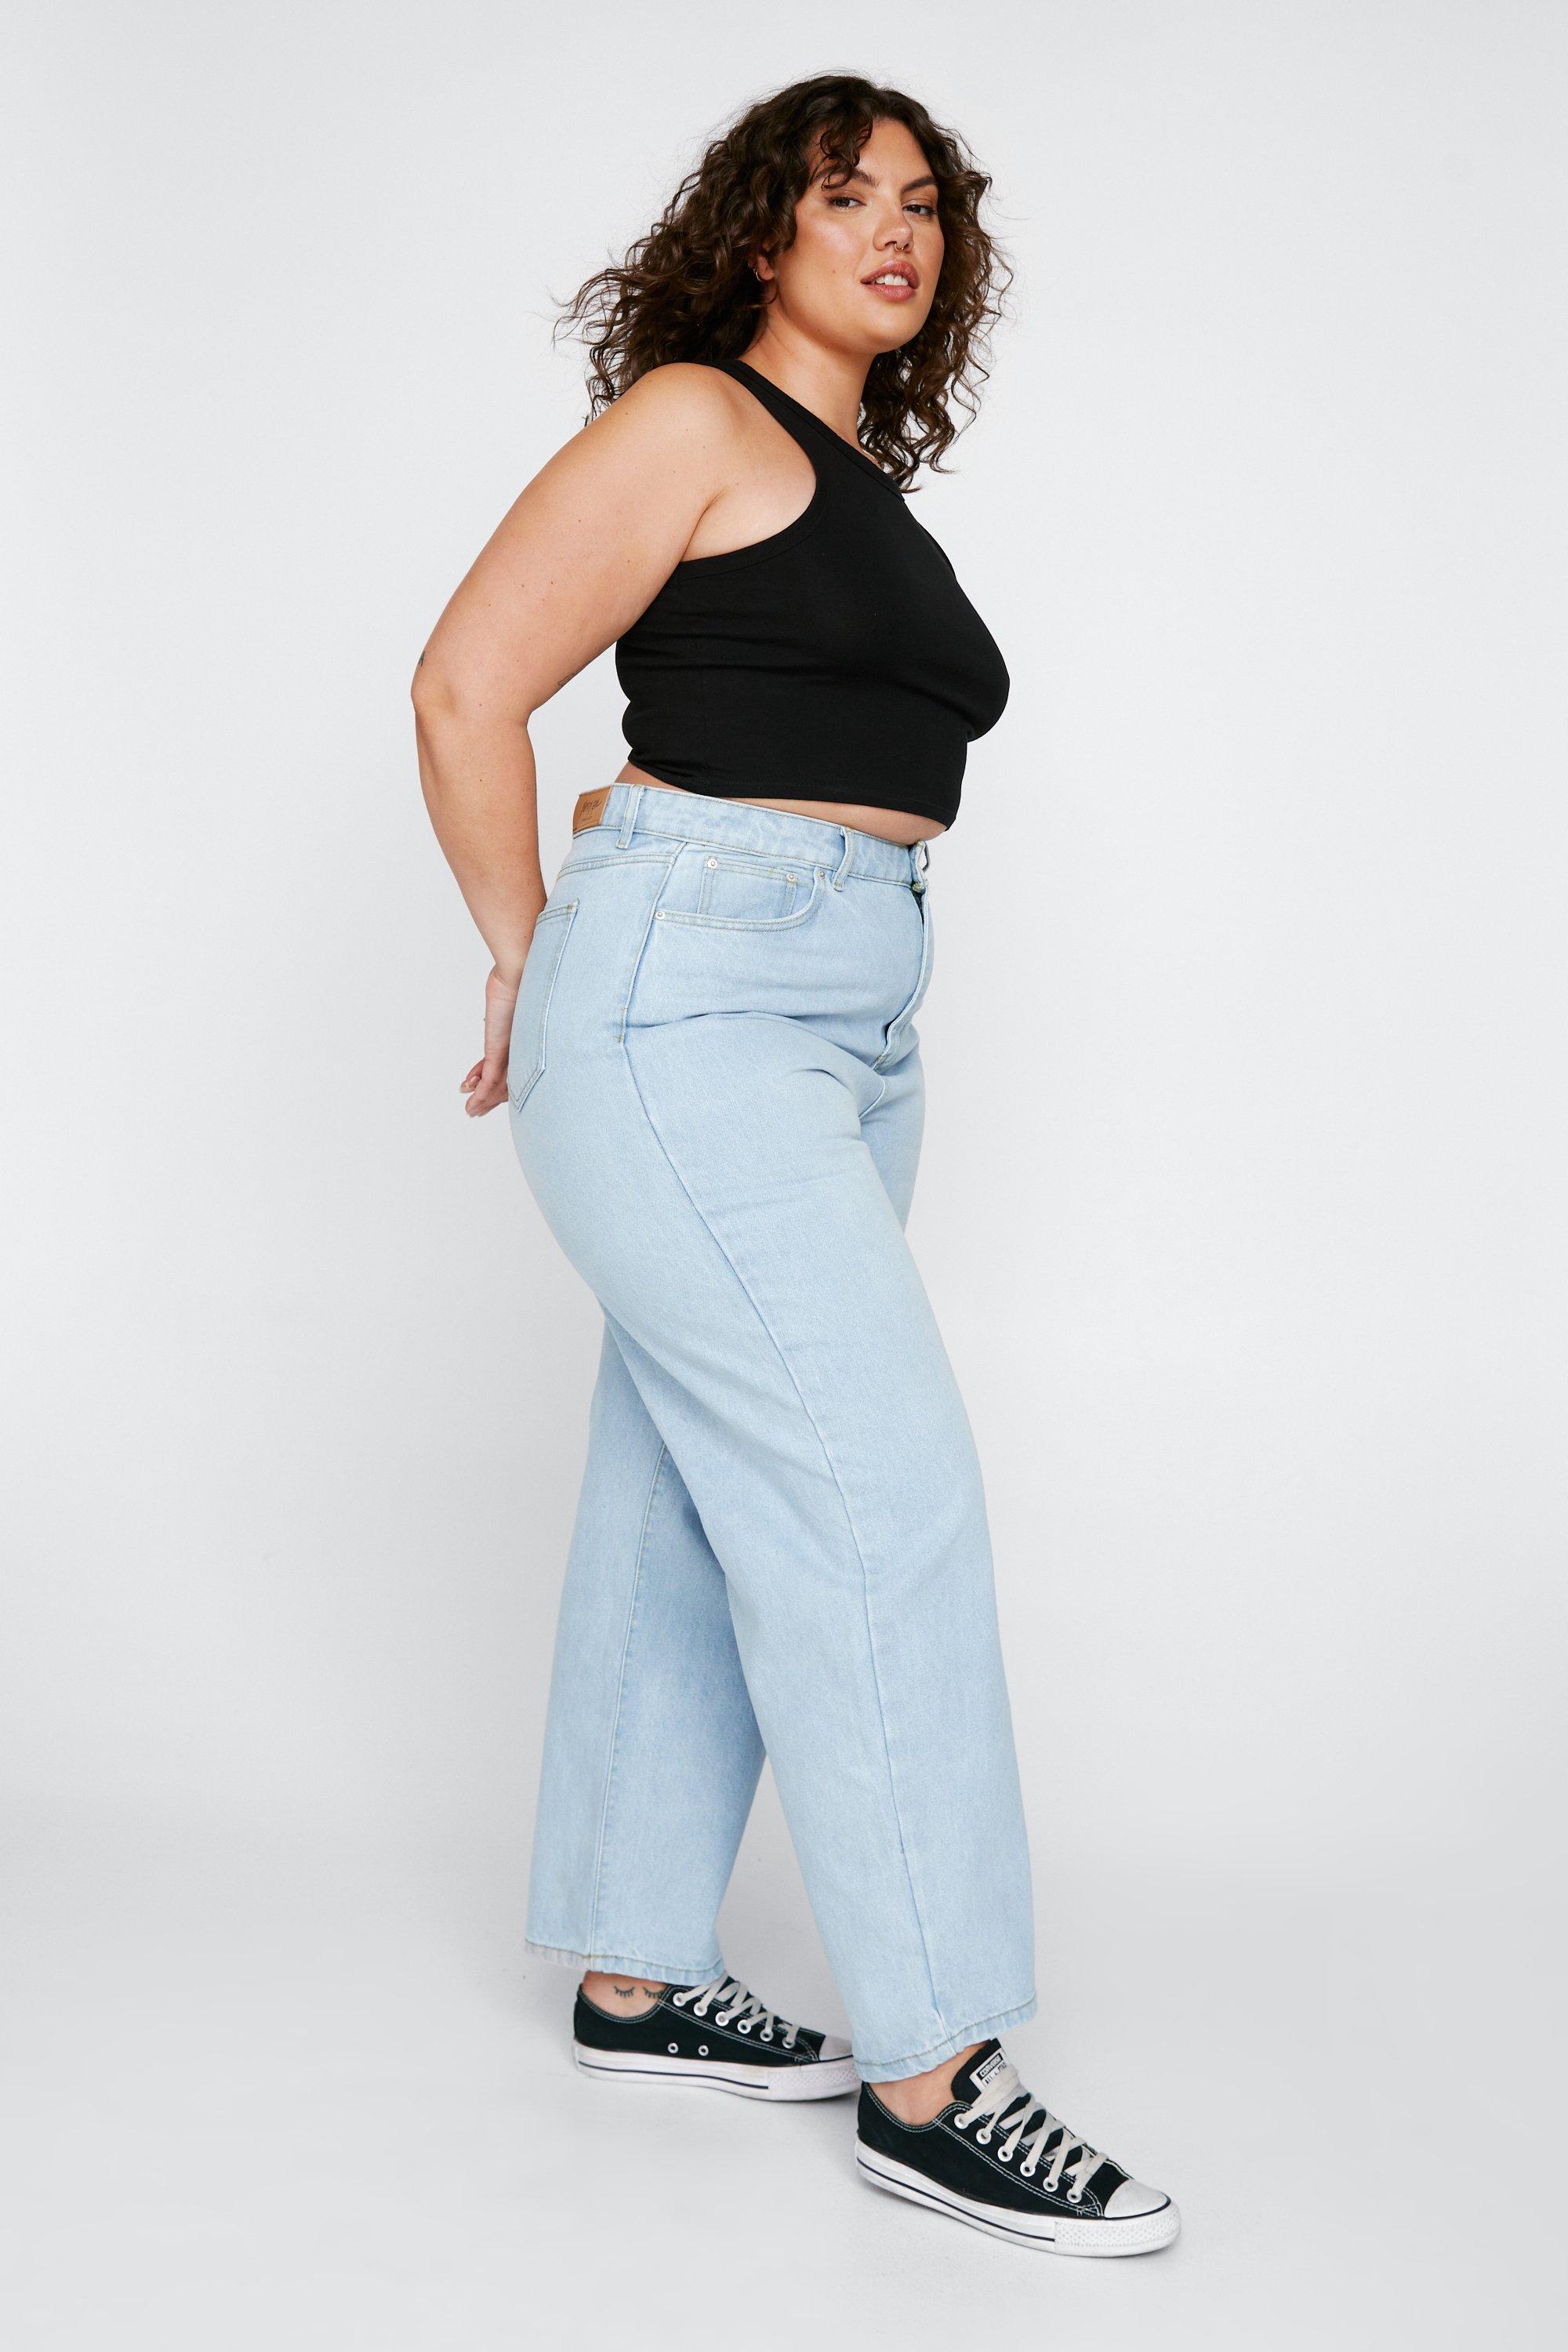 Fashion (Gray)MUMU Women Plus Size Stretchy High Waisted Jeans Big Hips Pull  Up Denim @ Best Price Online